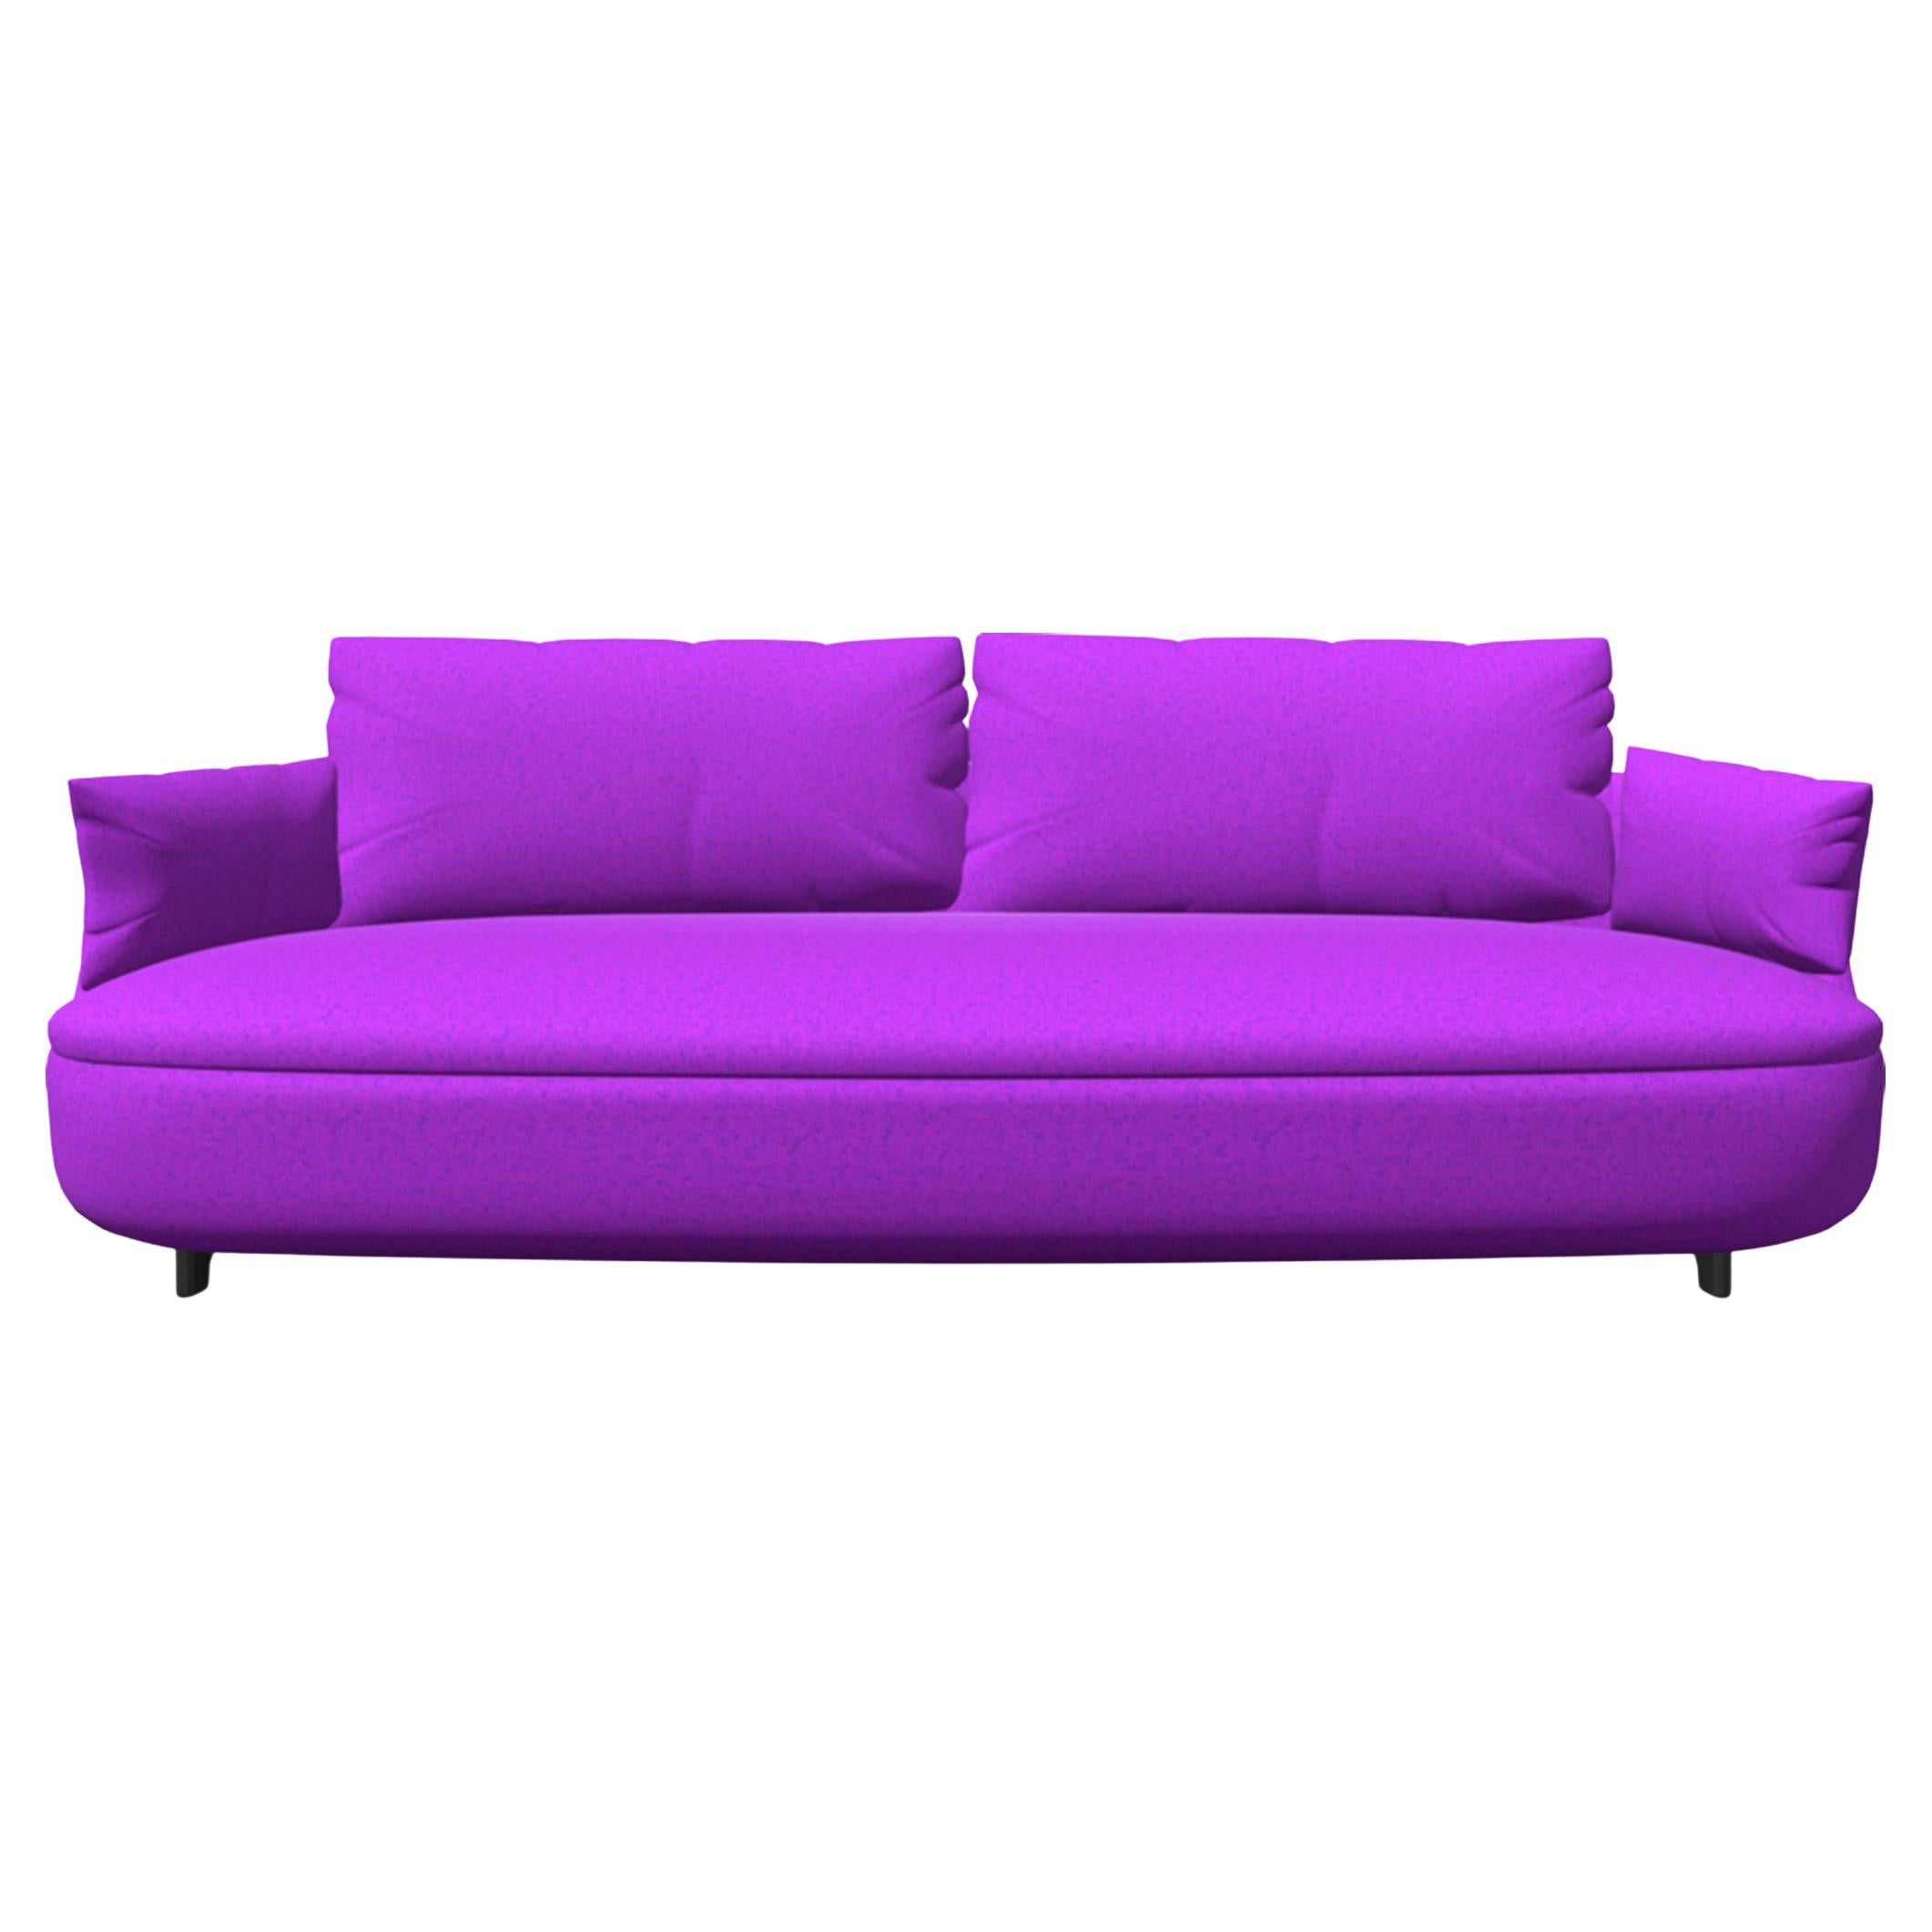 Moooi Bart Canape Sofa in Divina 3, 666 Purple Upholstery For Sale